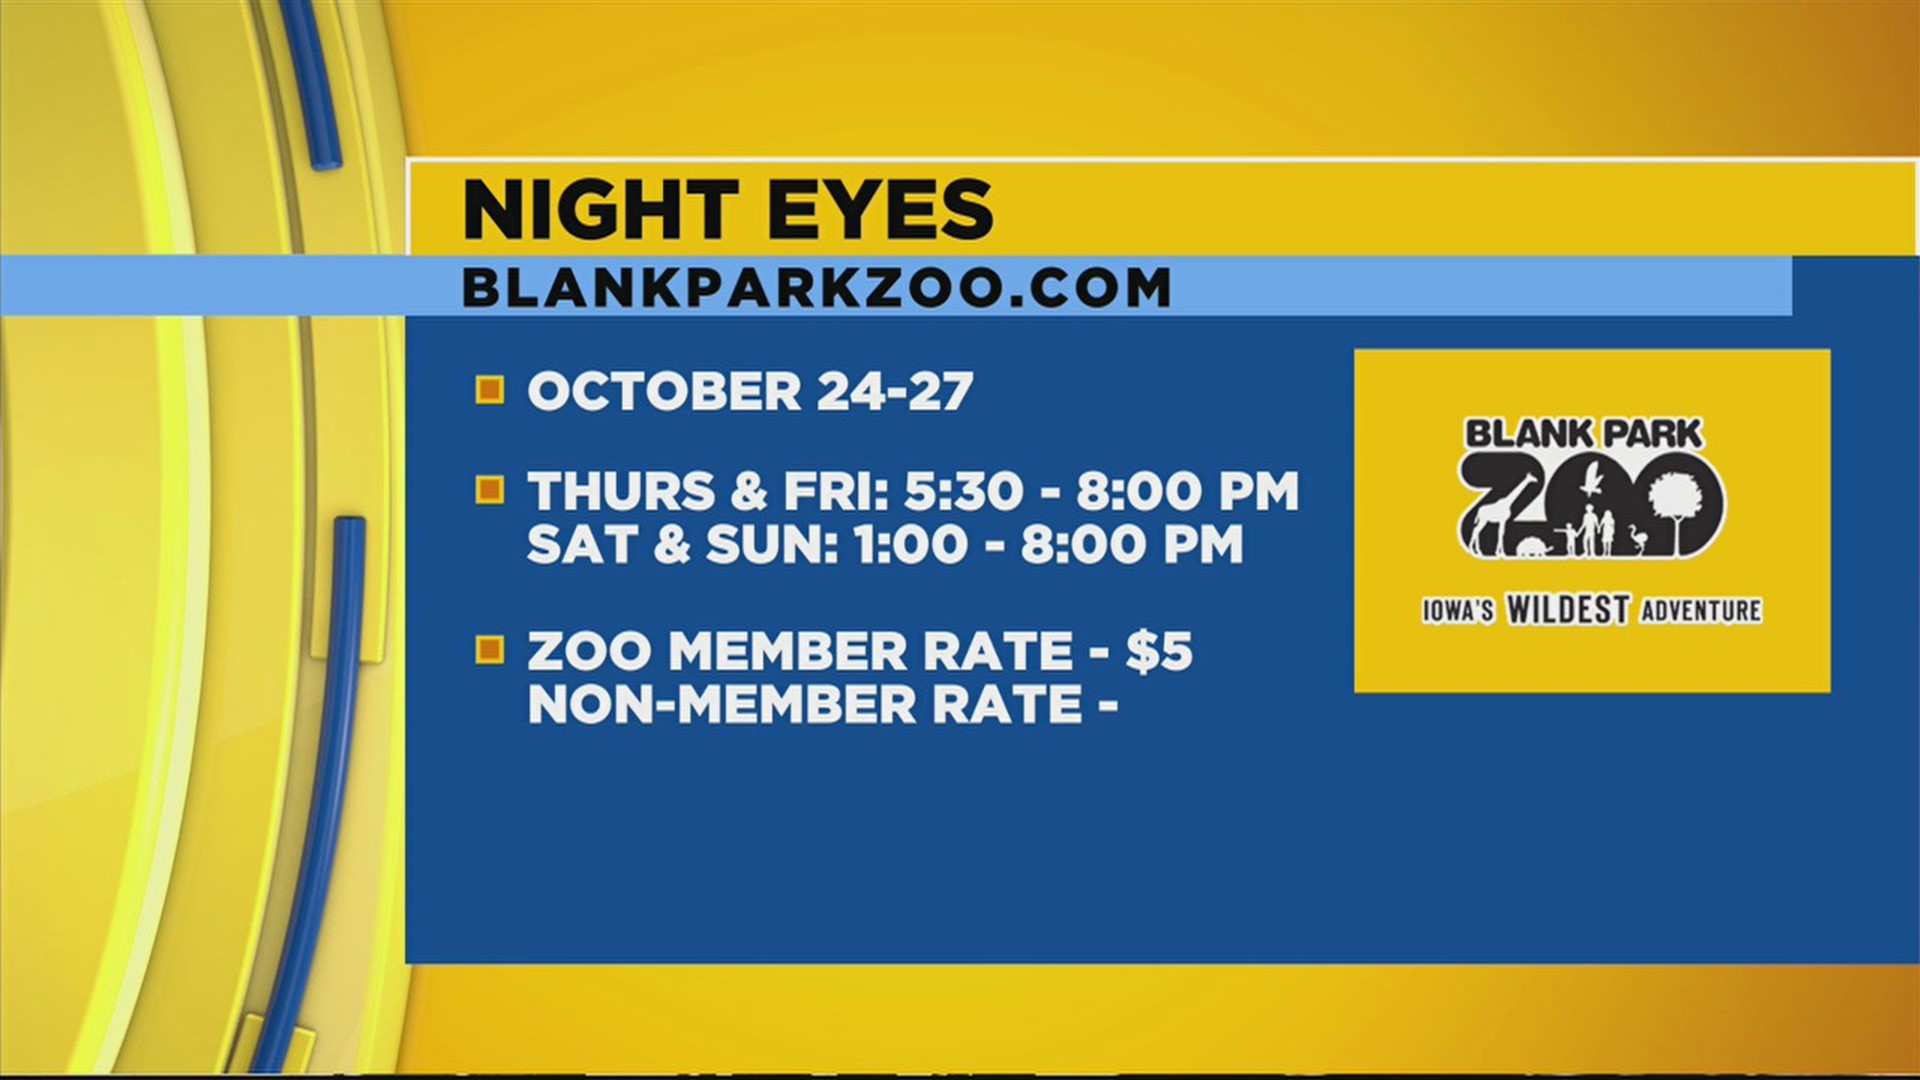 Last weekend for Night Eyes at the Blank Park Zoo